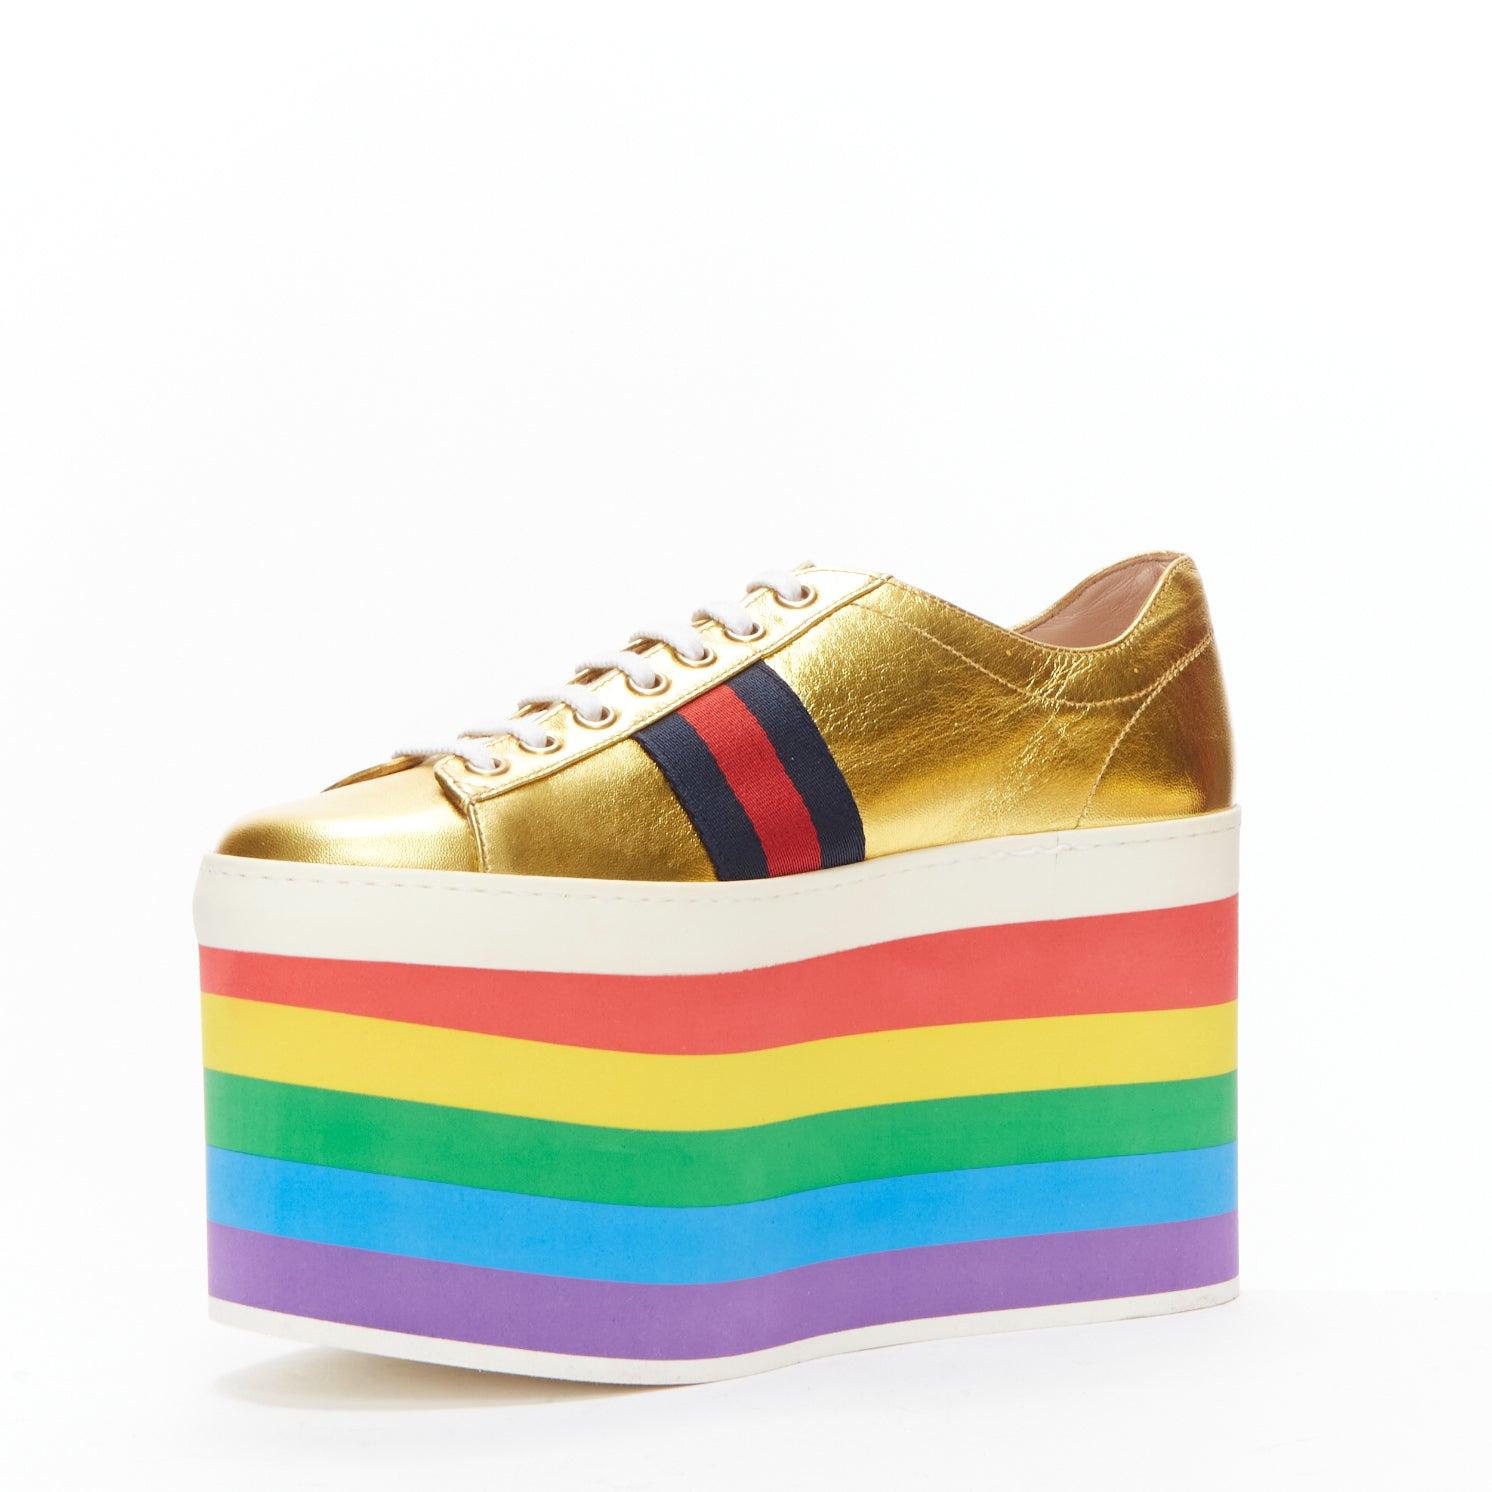 GUCCI Alessandro Michele Peggy rainbow gold web platform sneakers EU37.5 In Good Condition For Sale In Hong Kong, NT